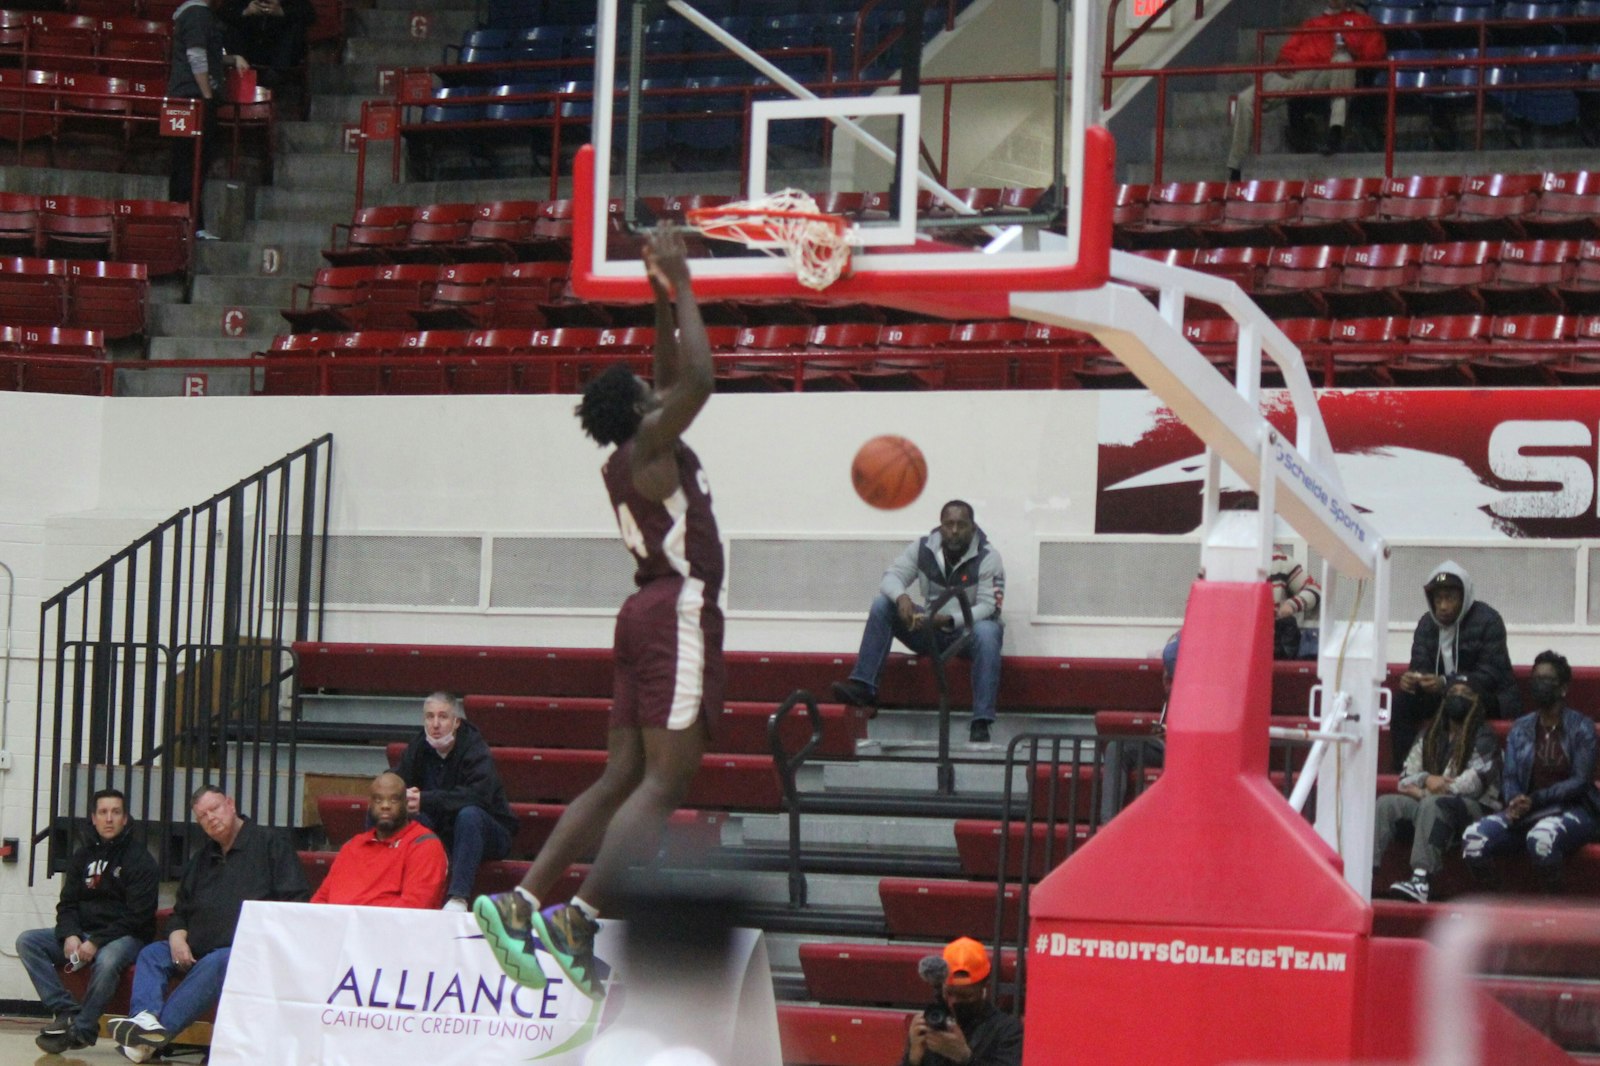 Chris Mutebi’s breakaway slam dunk was the back-breaker against Macomb Dakota, as University of Detroit-Jesuit broke open a close game and pulled away for a 77-47 win in the annual Calihan Challenge.